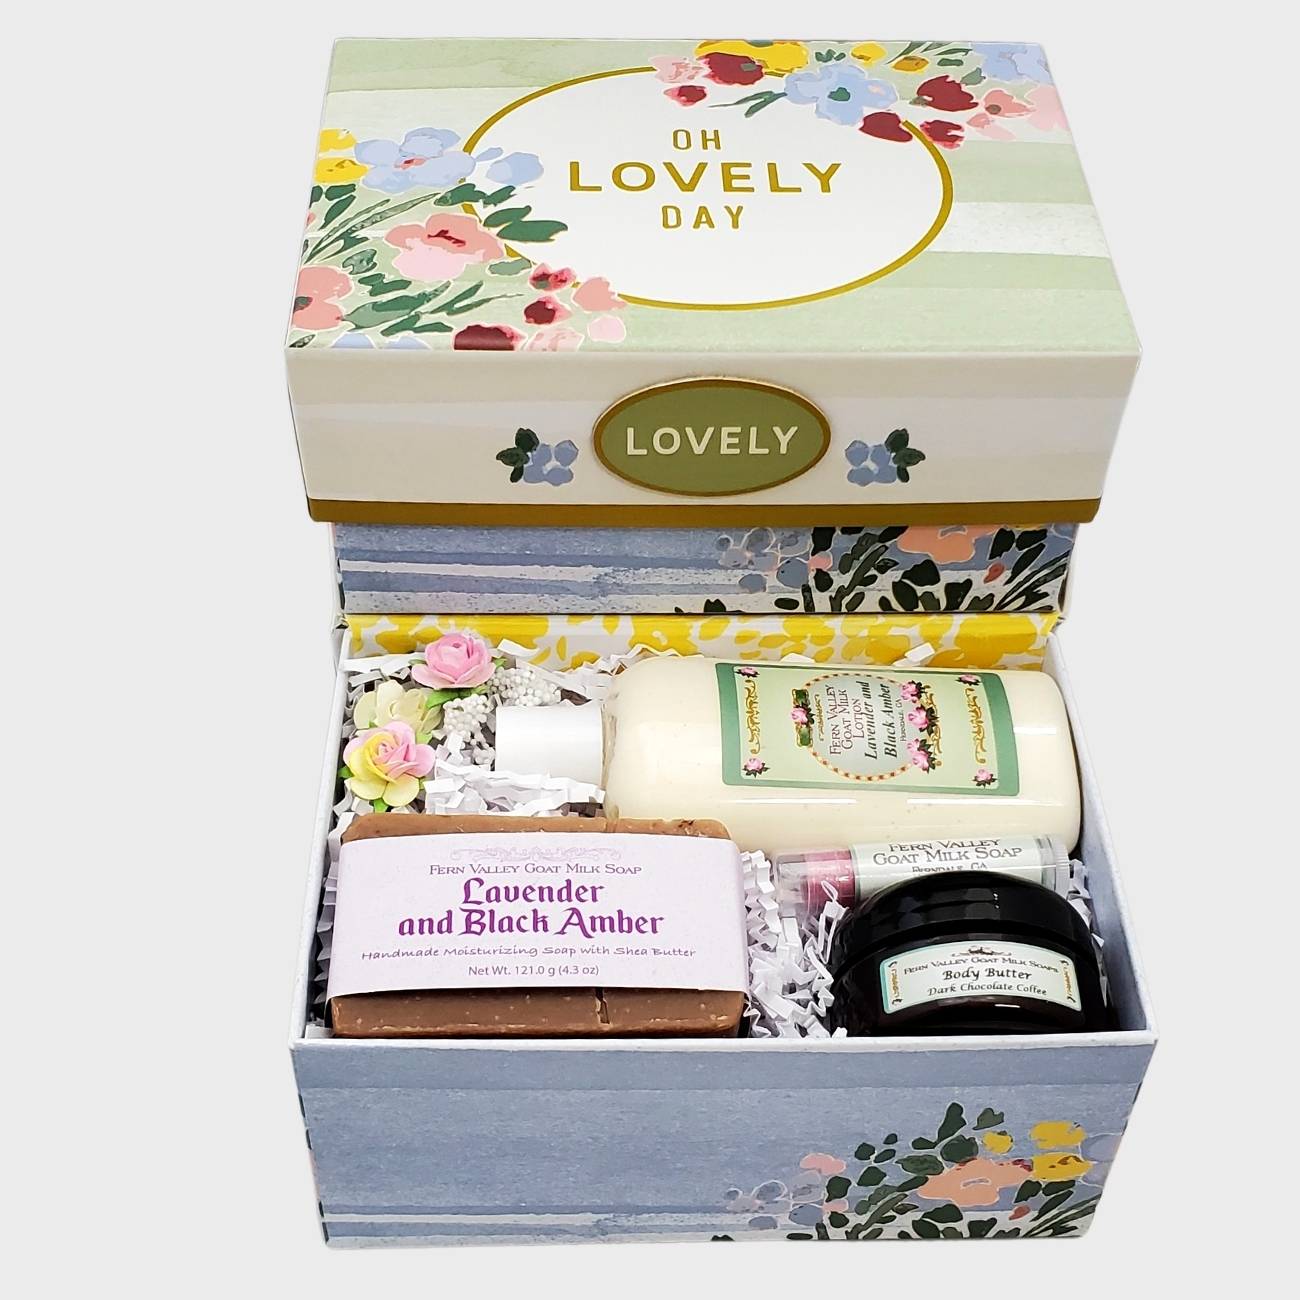 Goat Milk Soap &amp; Lotion + Body Butter  | Gift Set for Her | Fragrance Of Your Choice